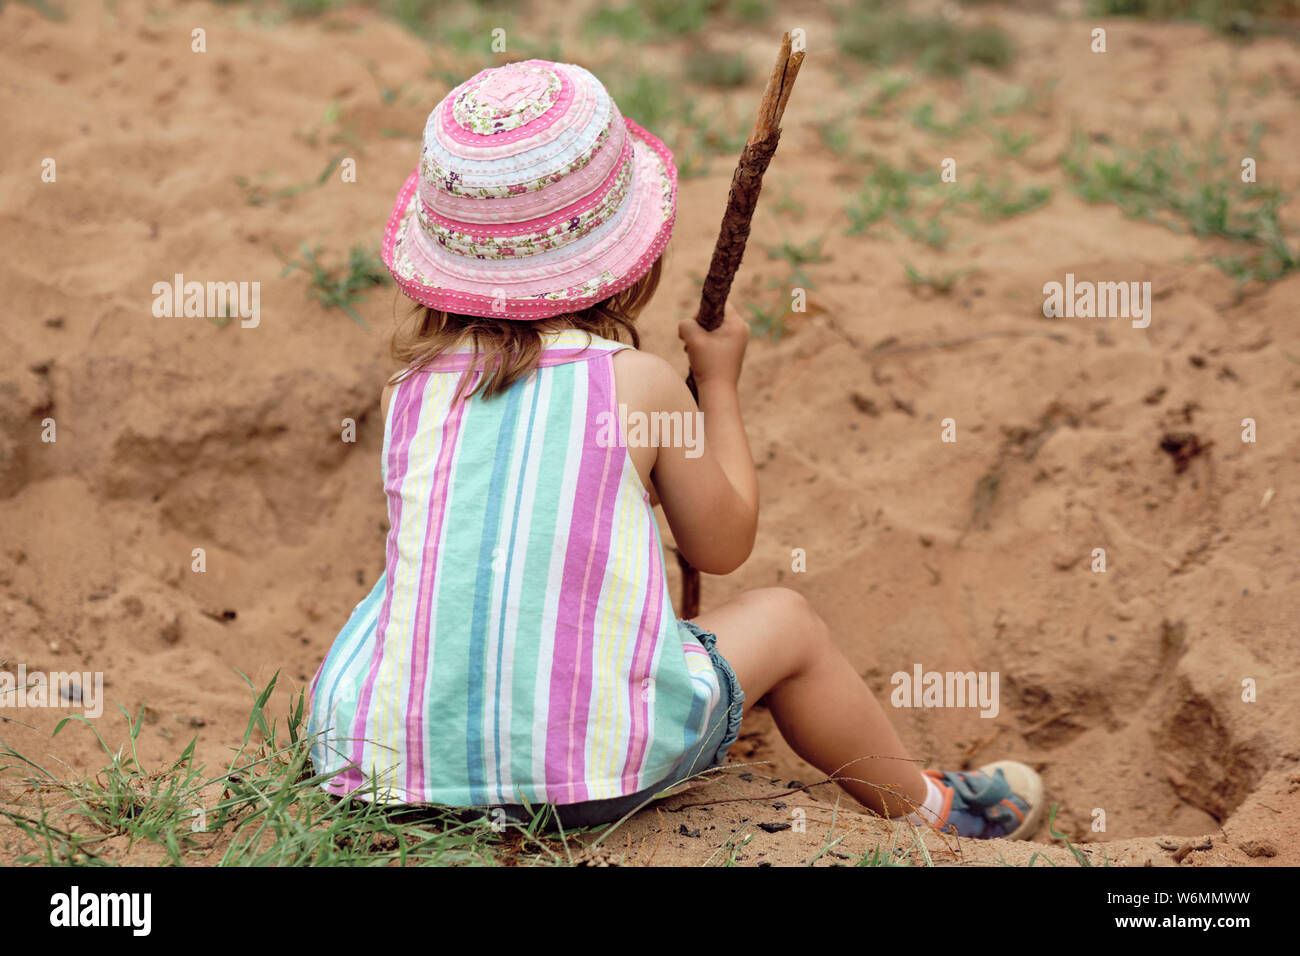 A child girl of 3-4 years old in summer clothing sitting and digging in the sand with a wooden stick Stock Photo